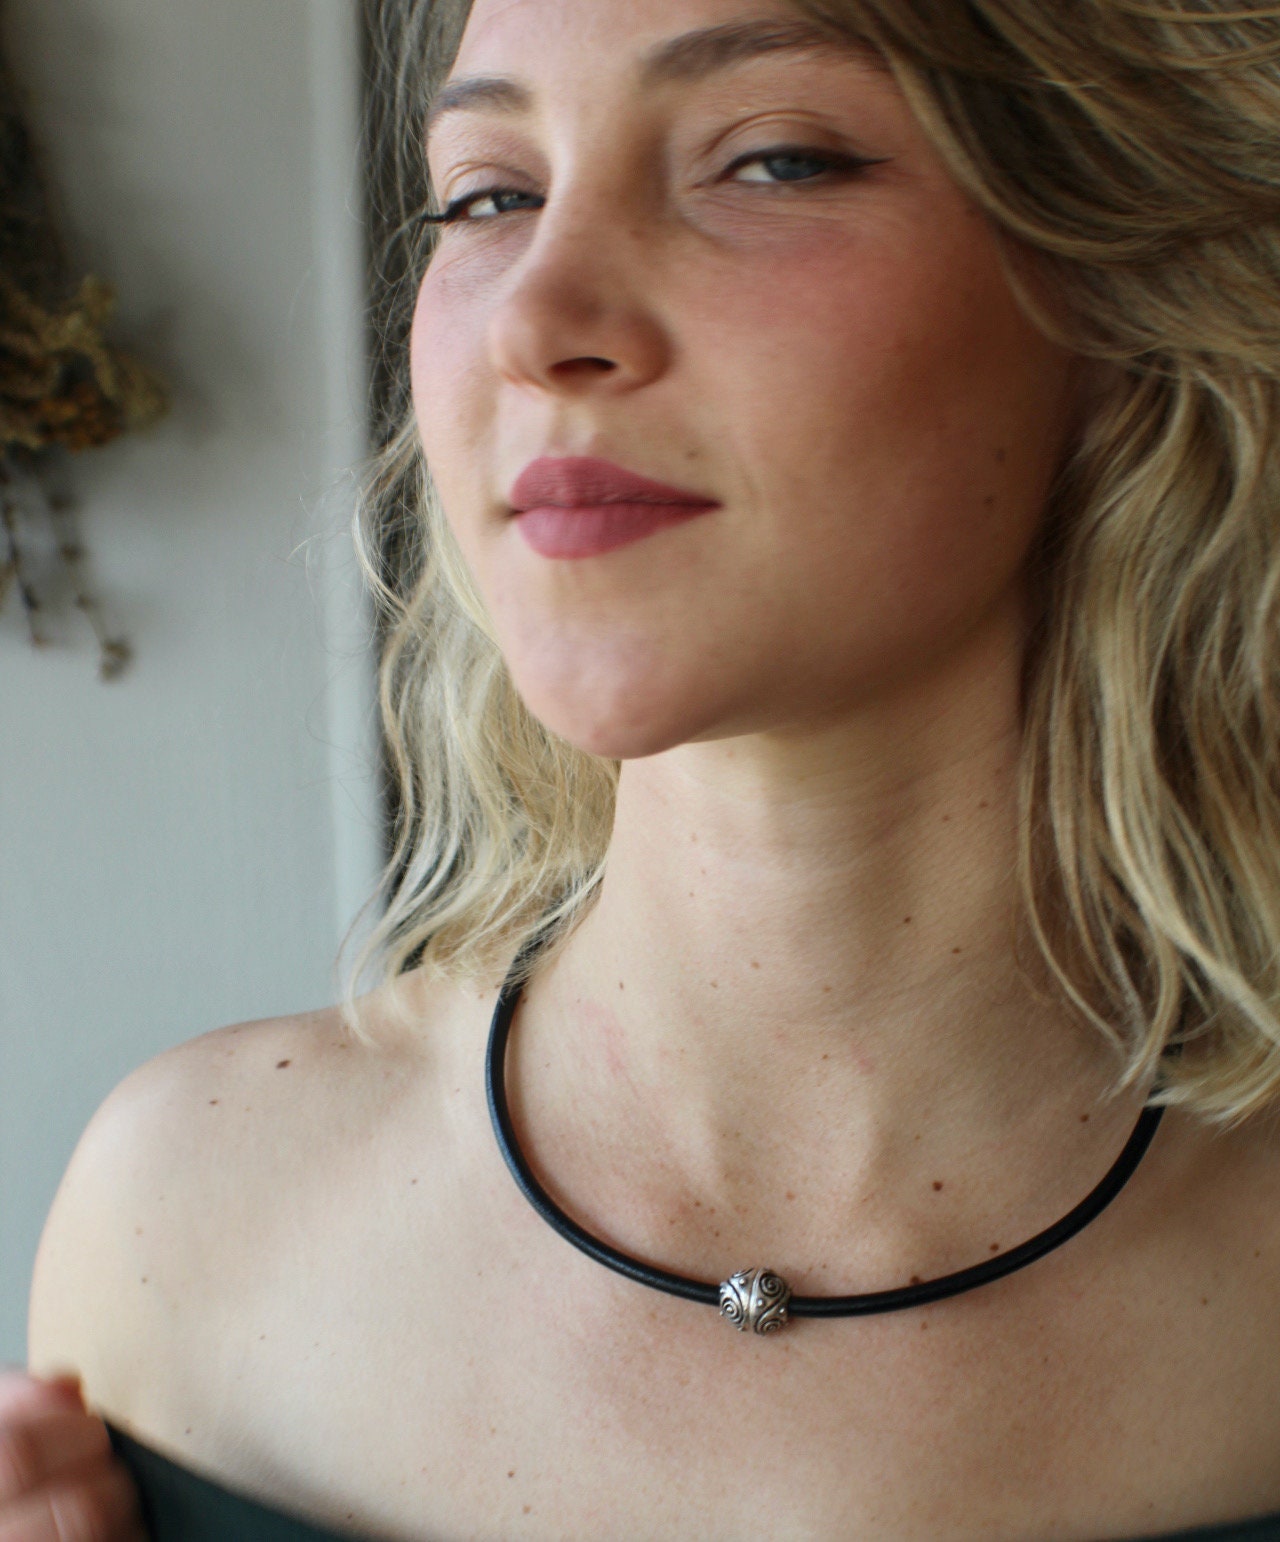 Leather Necklace. Gorgeous black Italian leather choker necklace fashioned with a center silver ornate magnetic clasp.